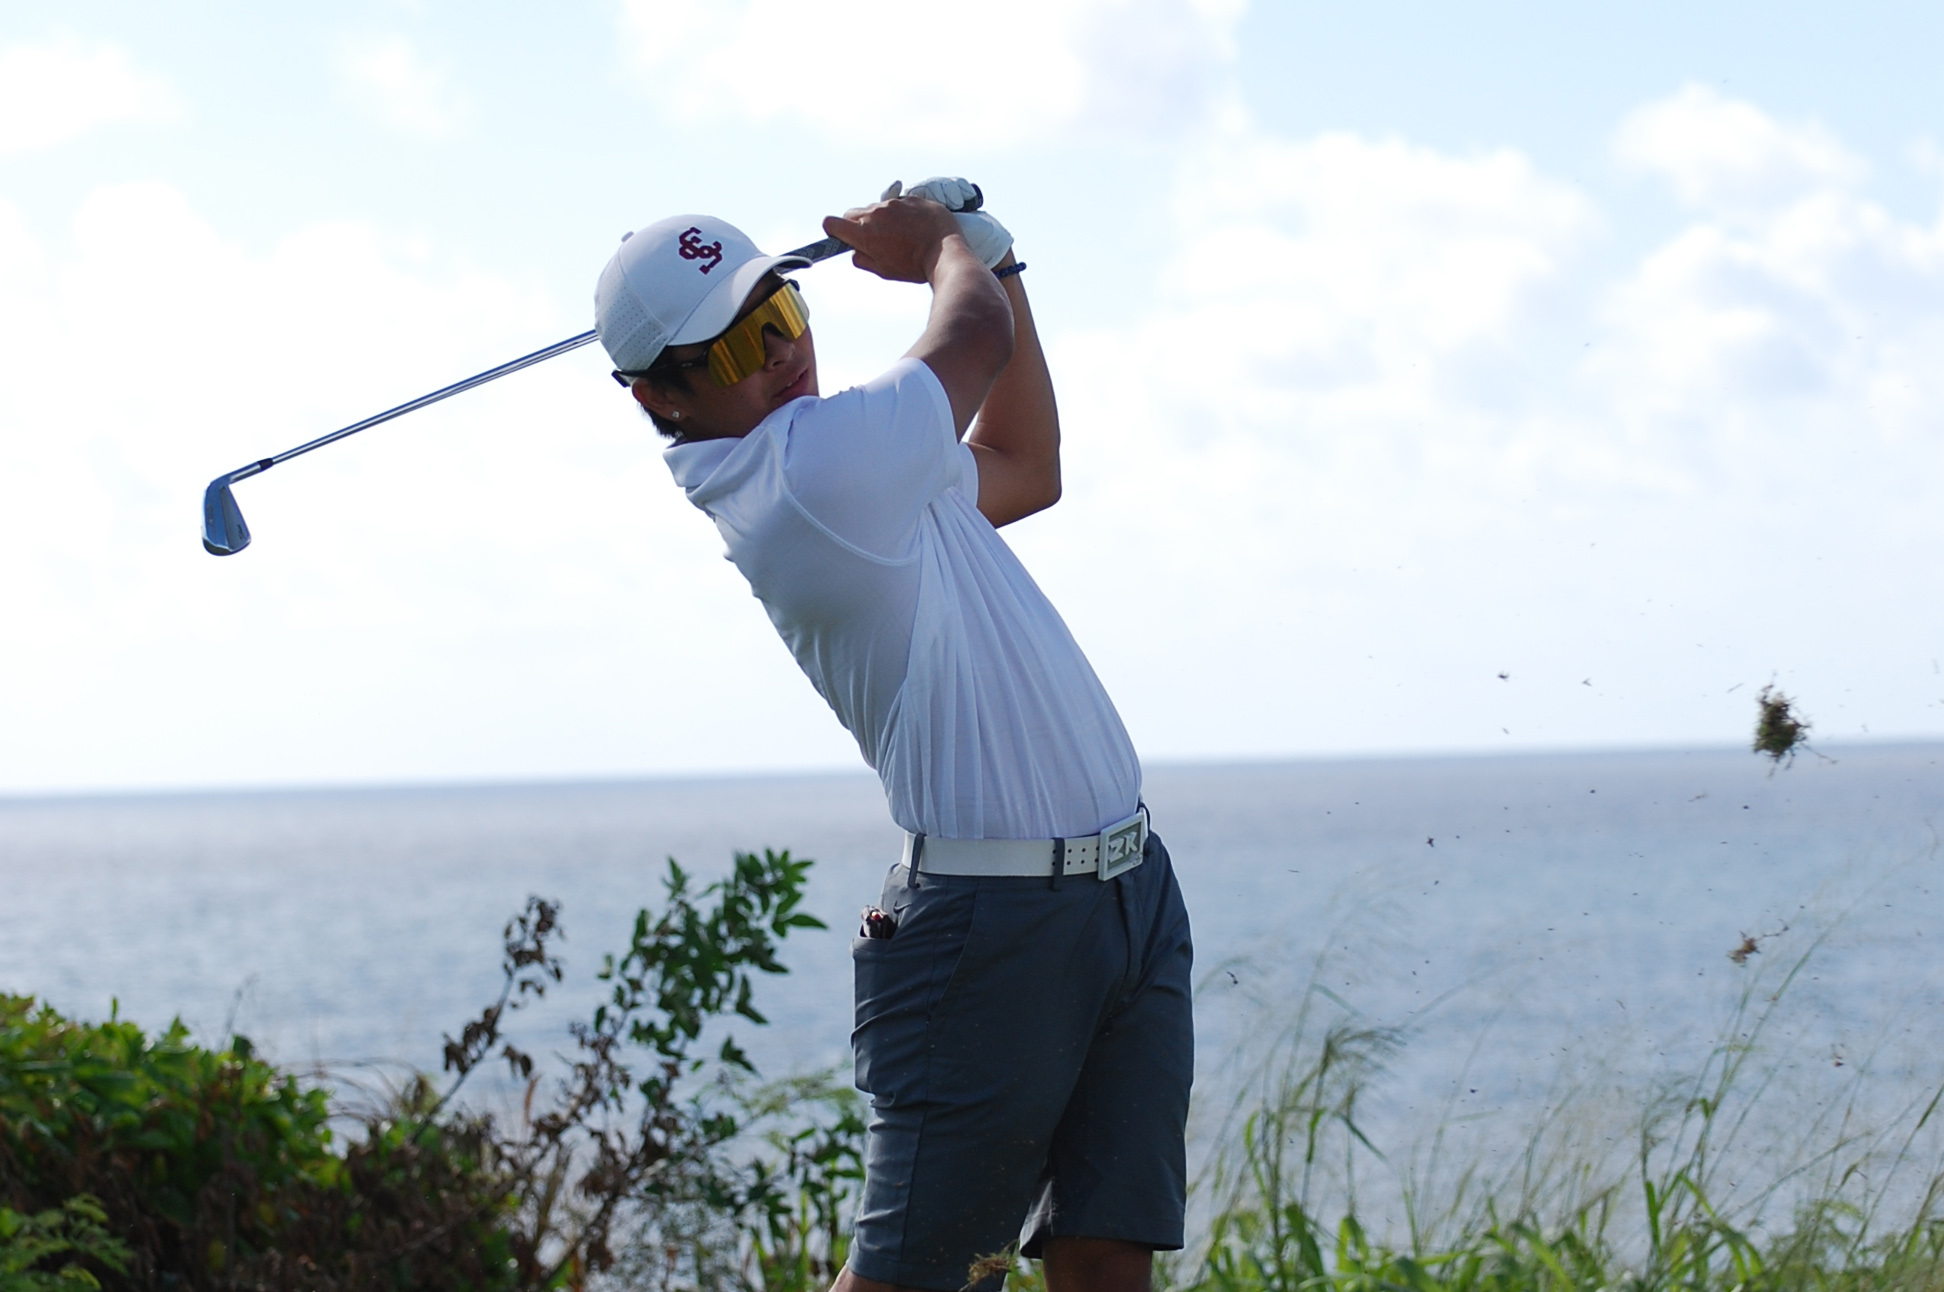 Kaneshiro T-3rd After Open Round of Play At The Prestige